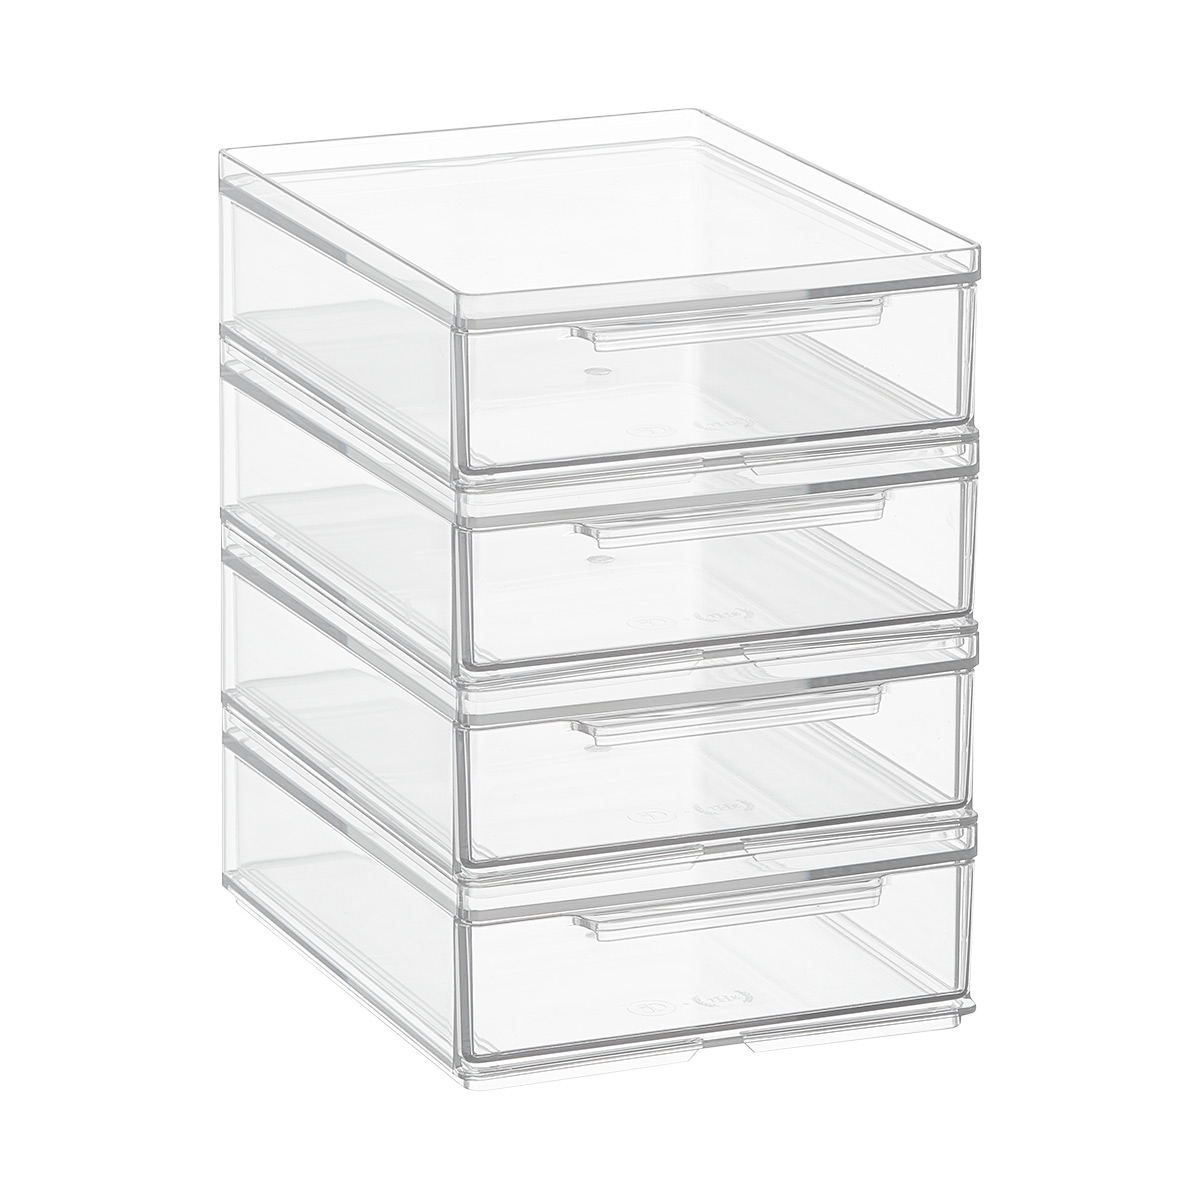 https://www.containerstore.com/catalogimages/455261/Case_Of_4_THE_HOME_EDIT_Small_Shallo.jpg